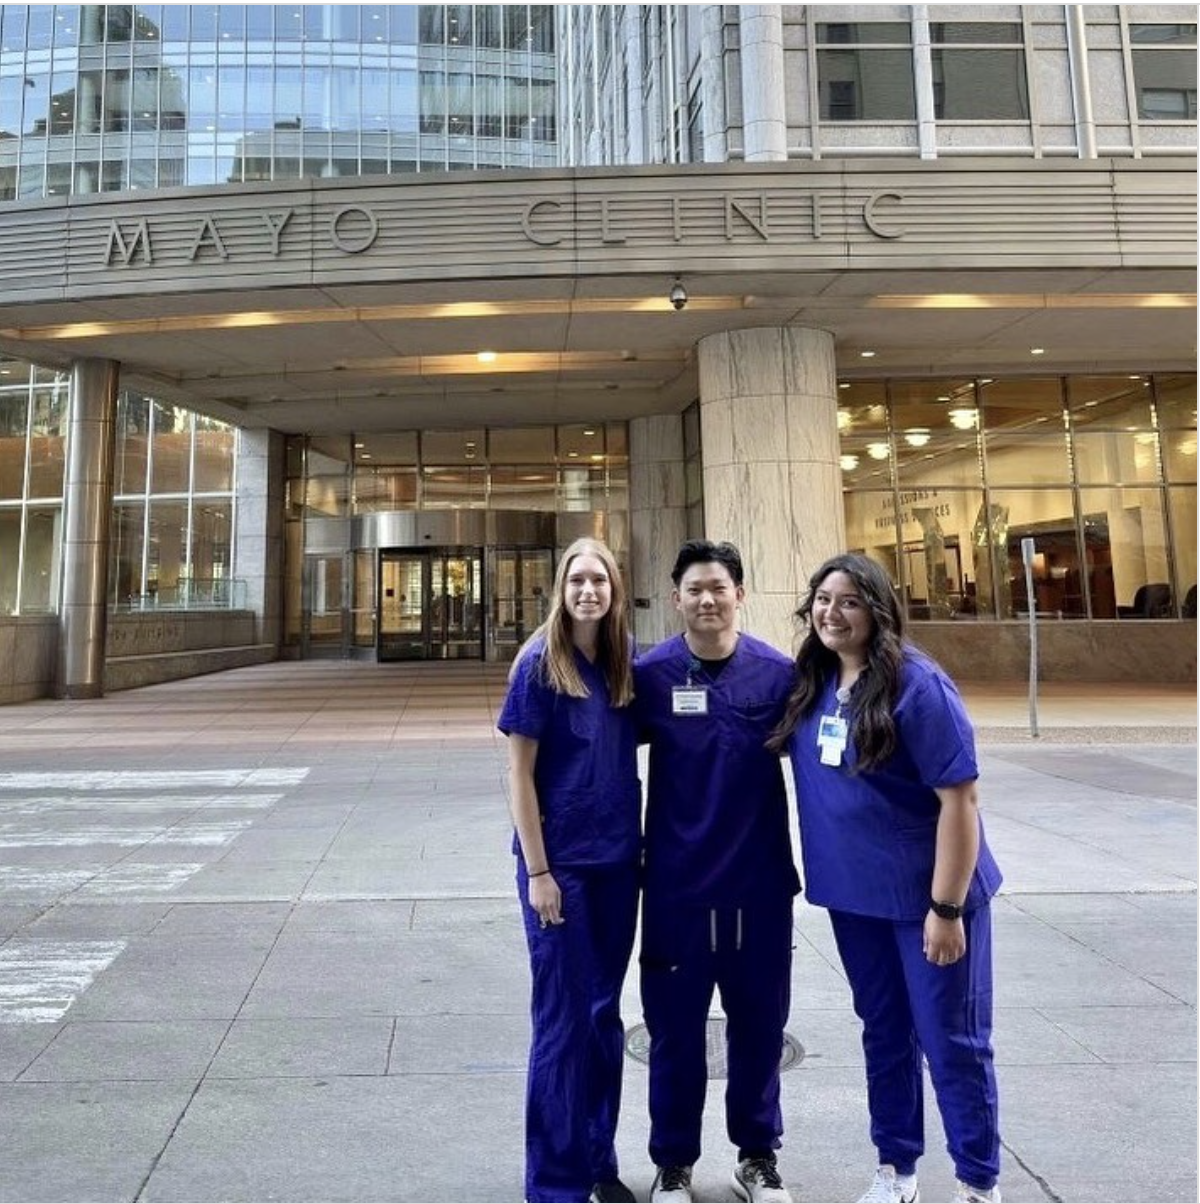 Itzel Santos stands with fellow Purdue nursing students in front of the Mayo Clinic in Rochester, Minnesota.